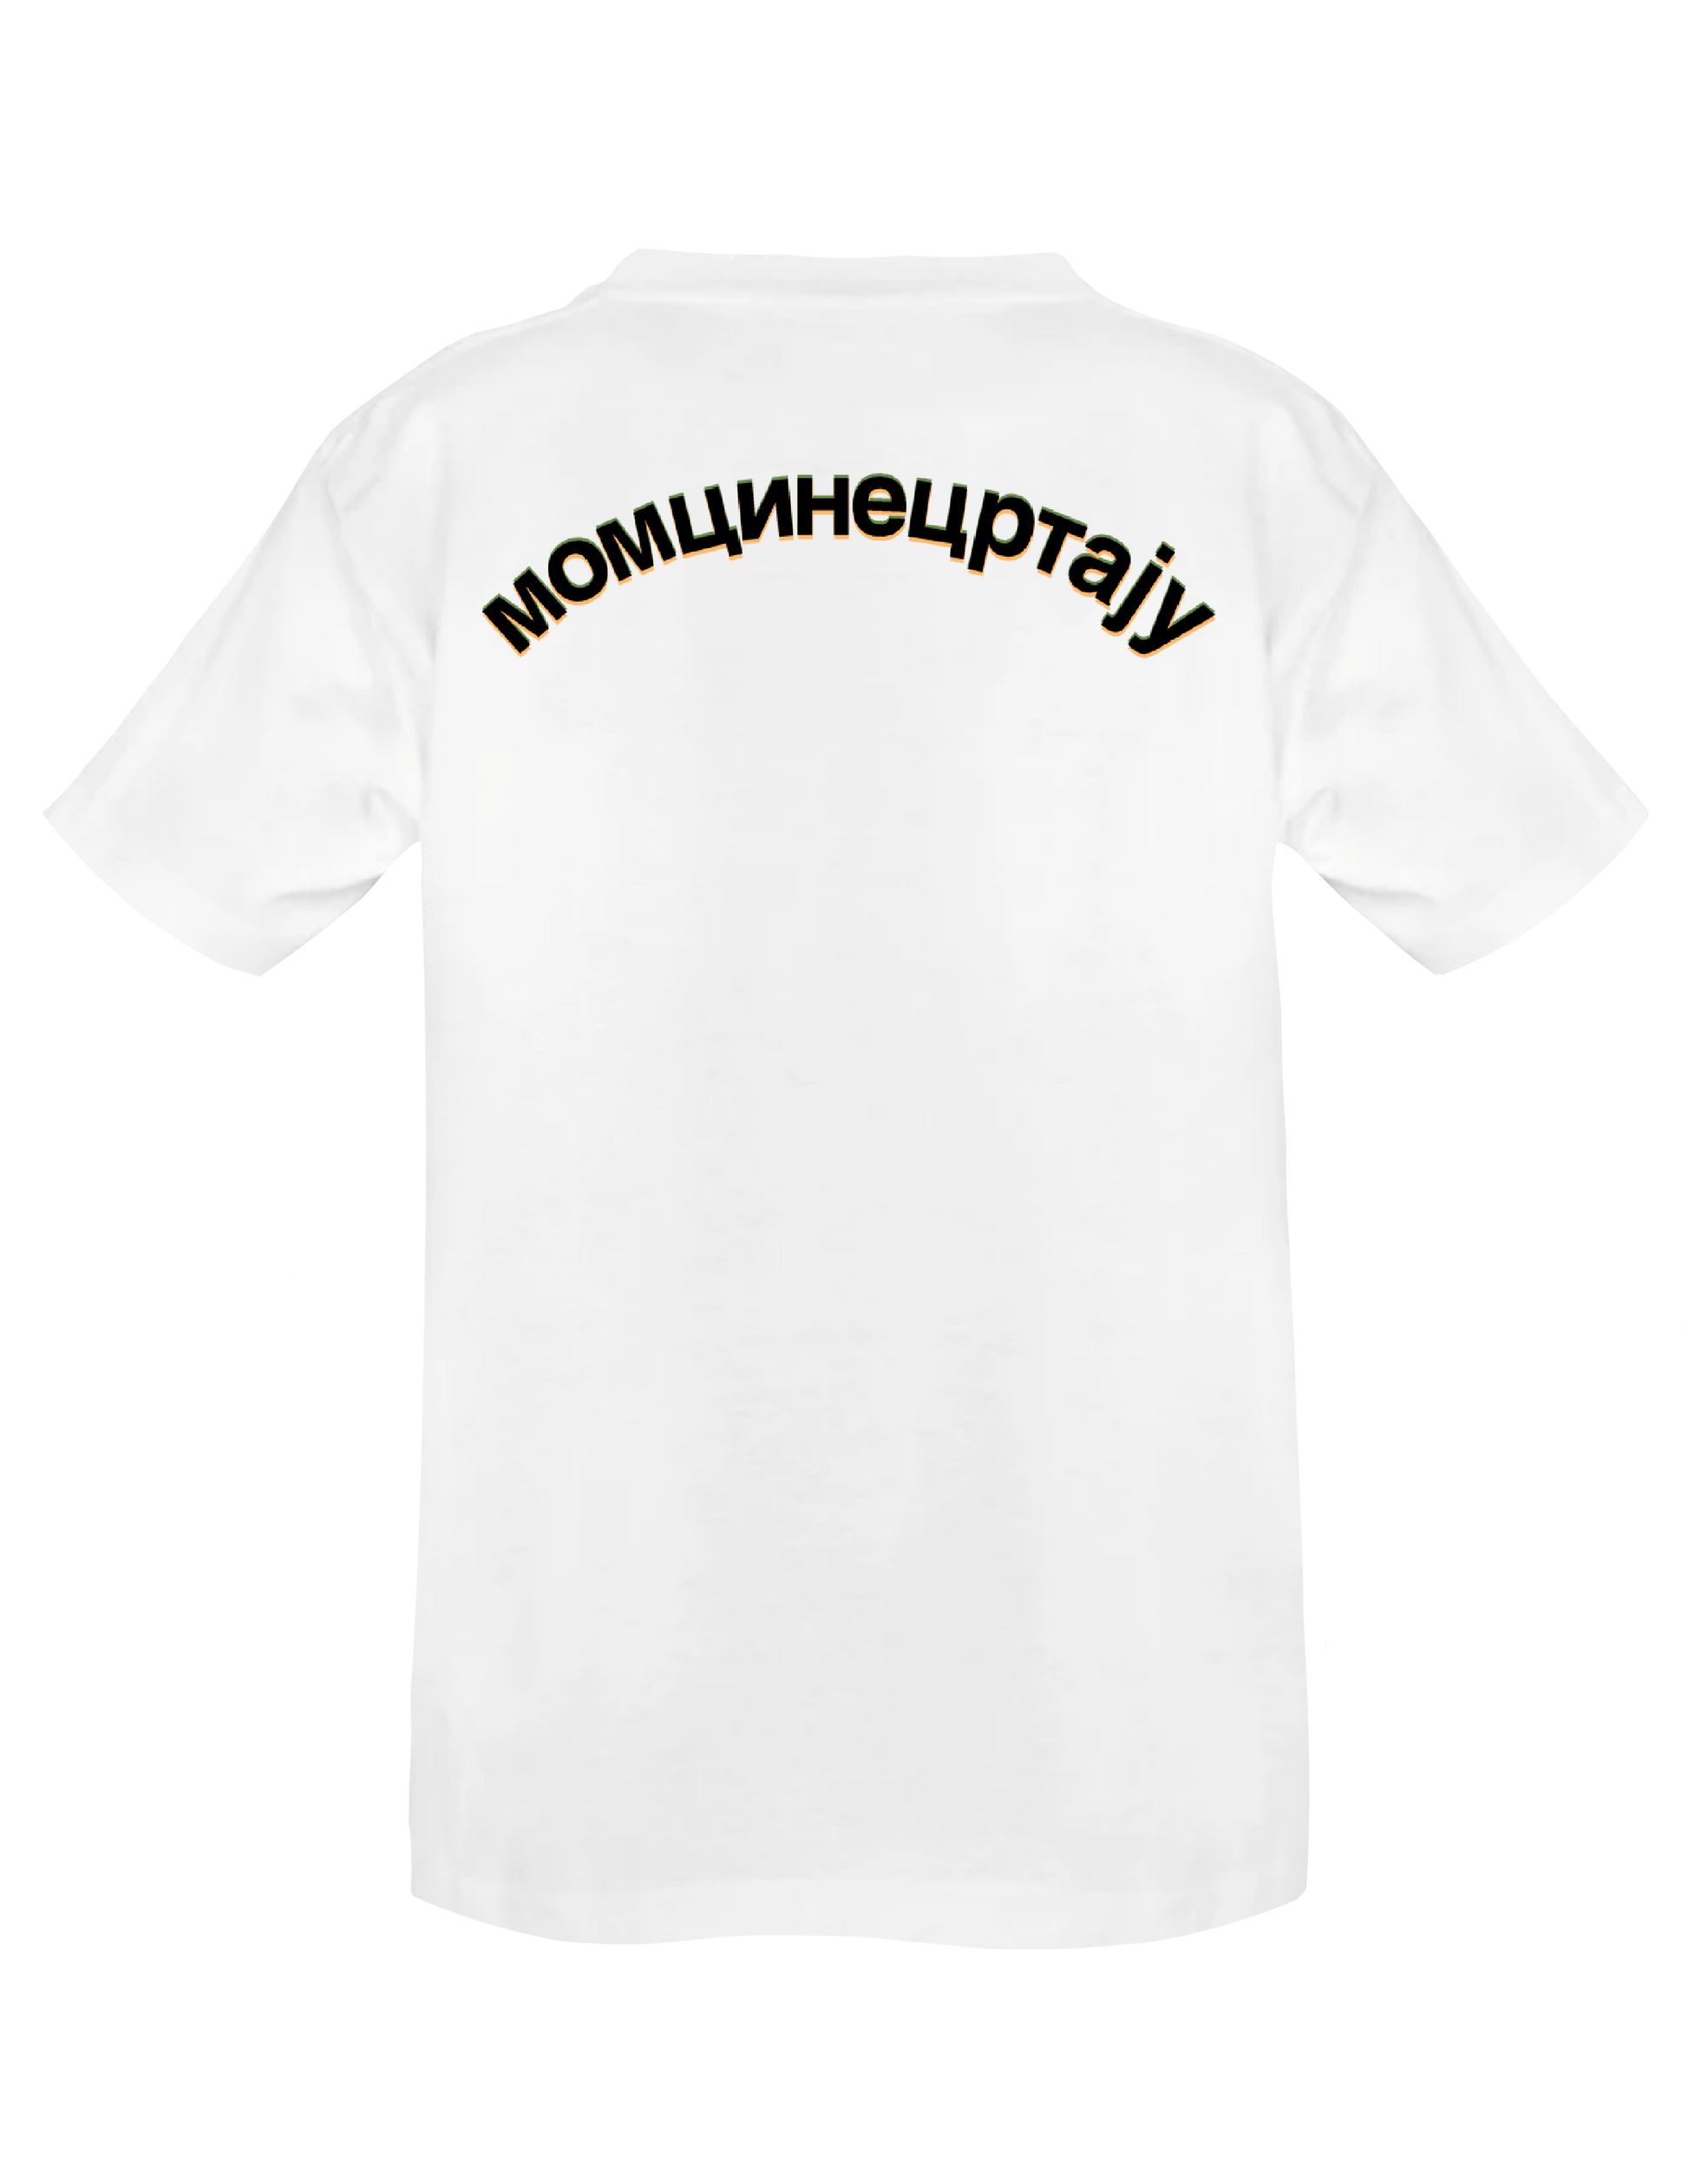 AFFIRMATION - ACCEPT YOUR OWN GROWTH (White) - T-Shirt by BOYSDONTDRAW